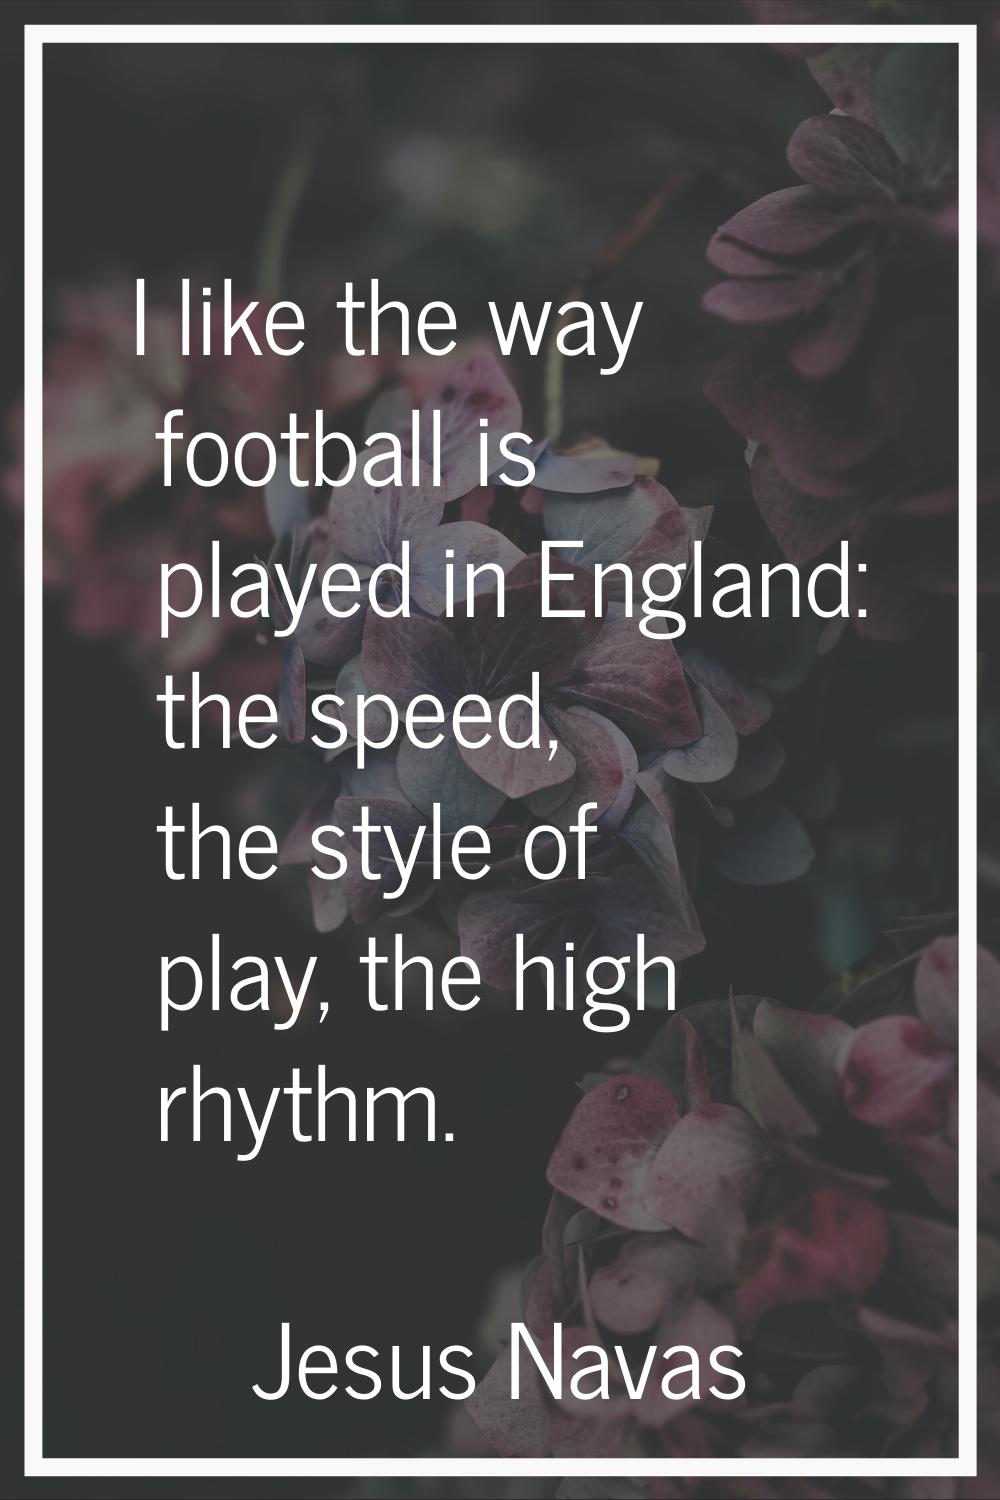 I like the way football is played in England: the speed, the style of play, the high rhythm.